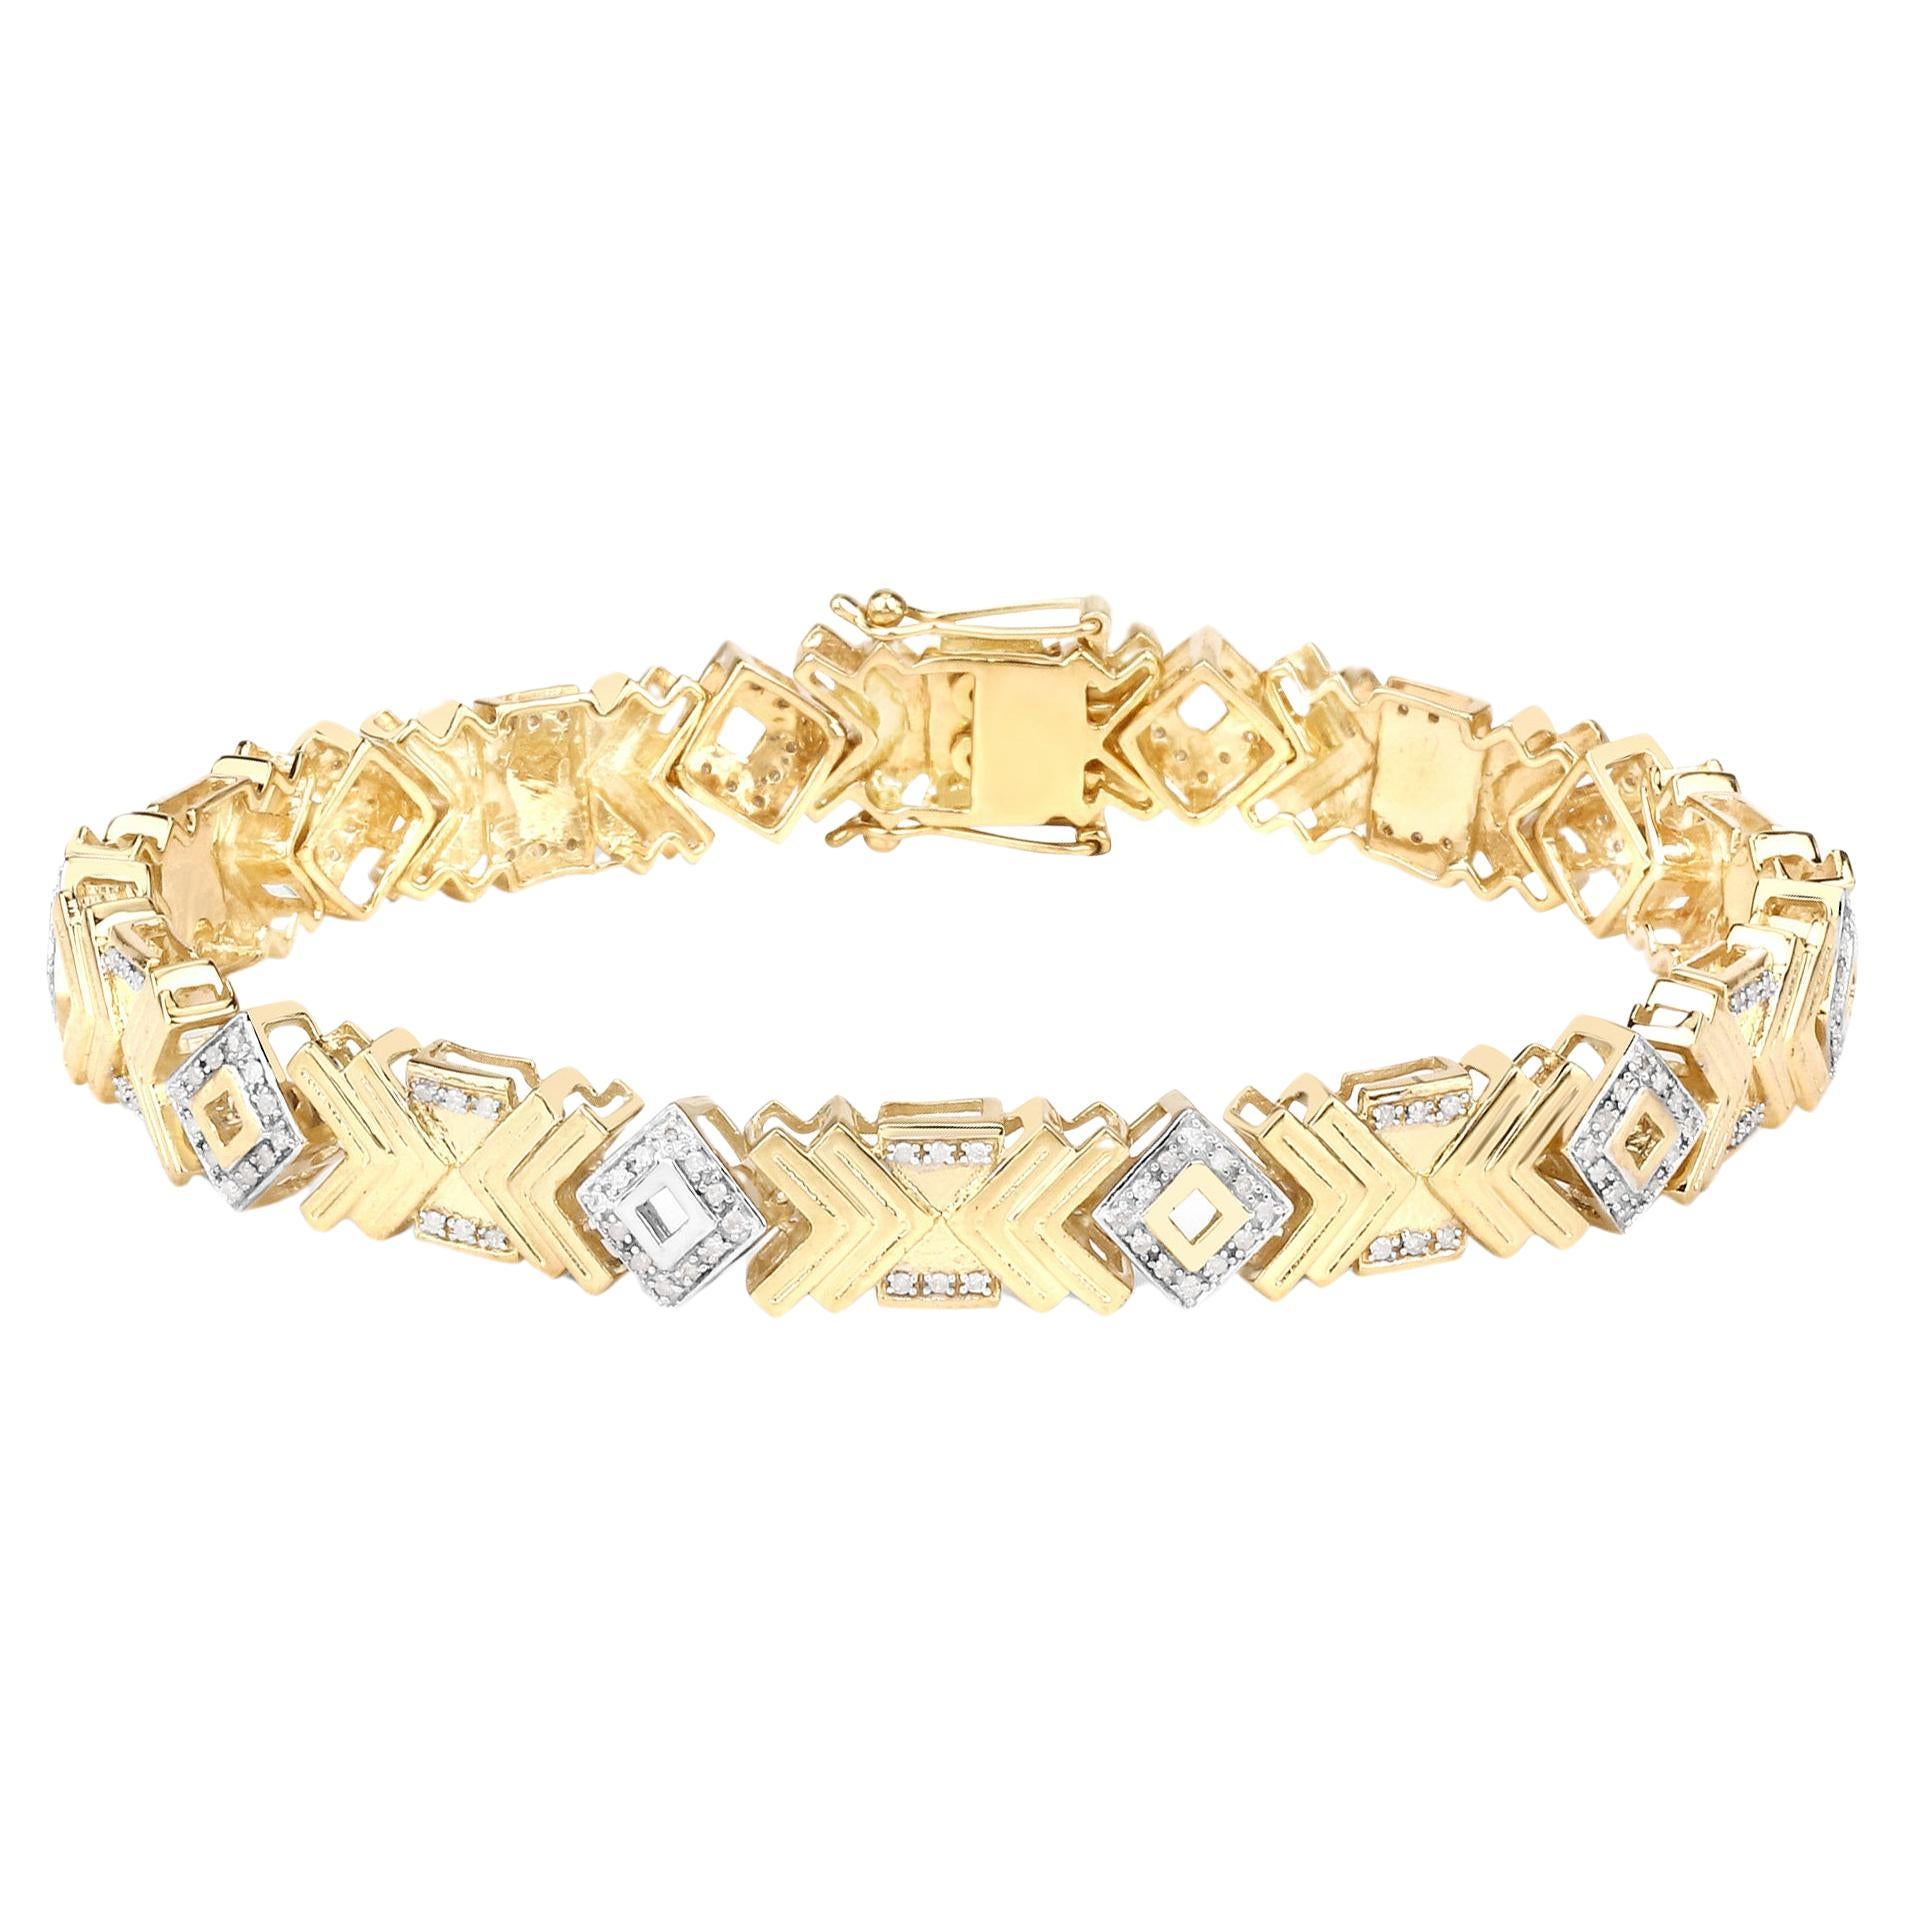 Diamond Cocktail Bracelet 14K Yellow Gold Plated Sterling Silver 9 Inches For Sale